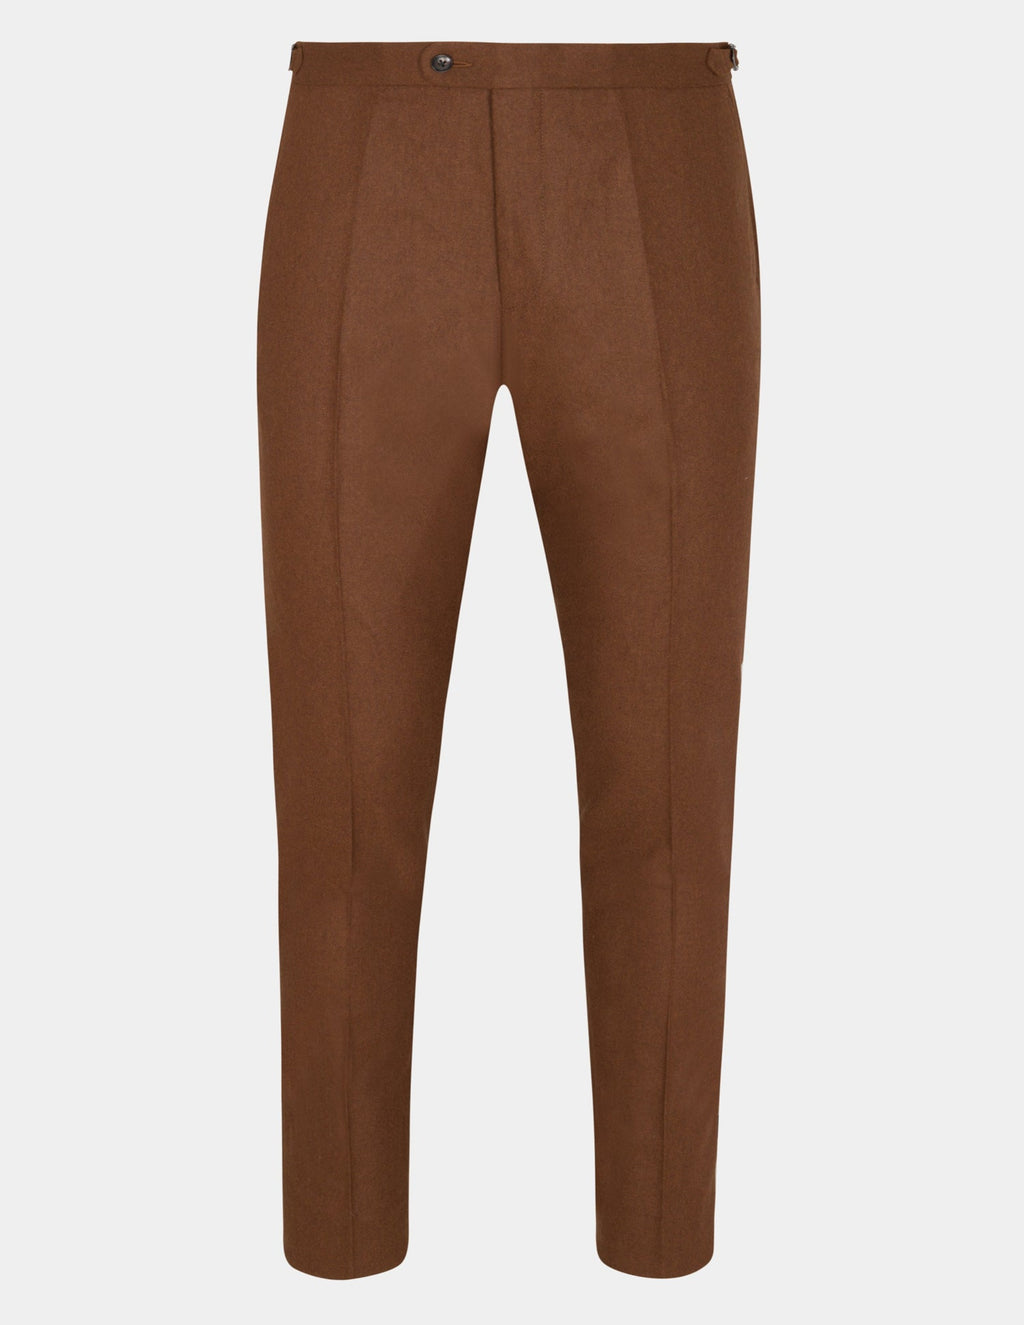 TROUSERS WOOL CASHMERE - LIGHT BROWN